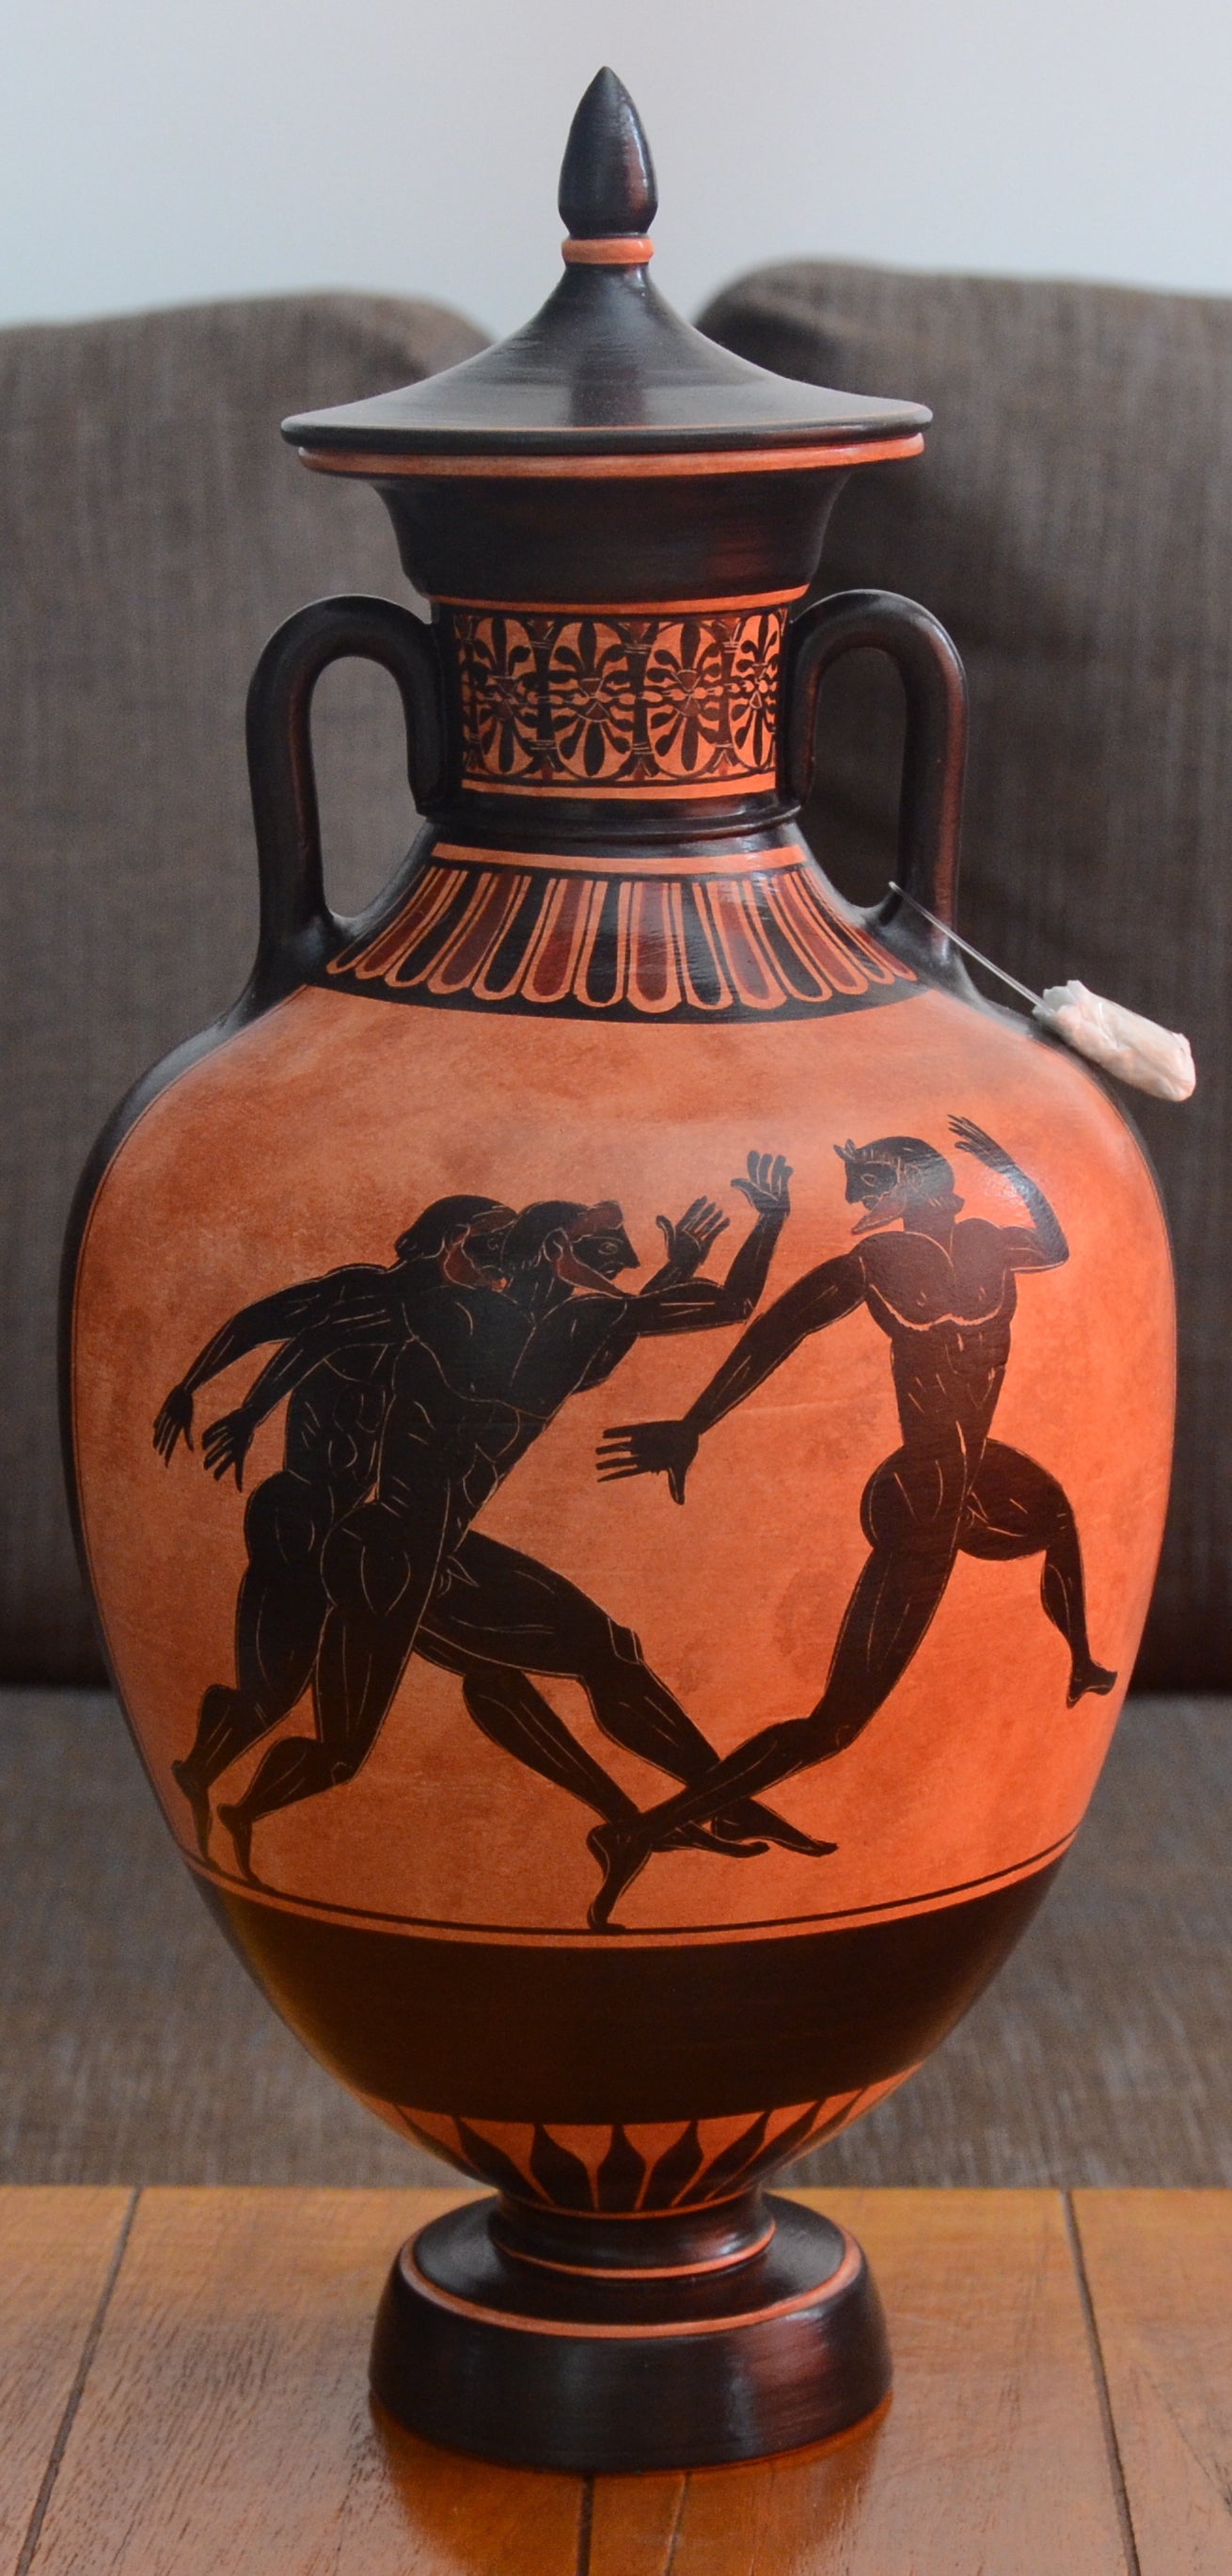 The Ancient Greek pottery